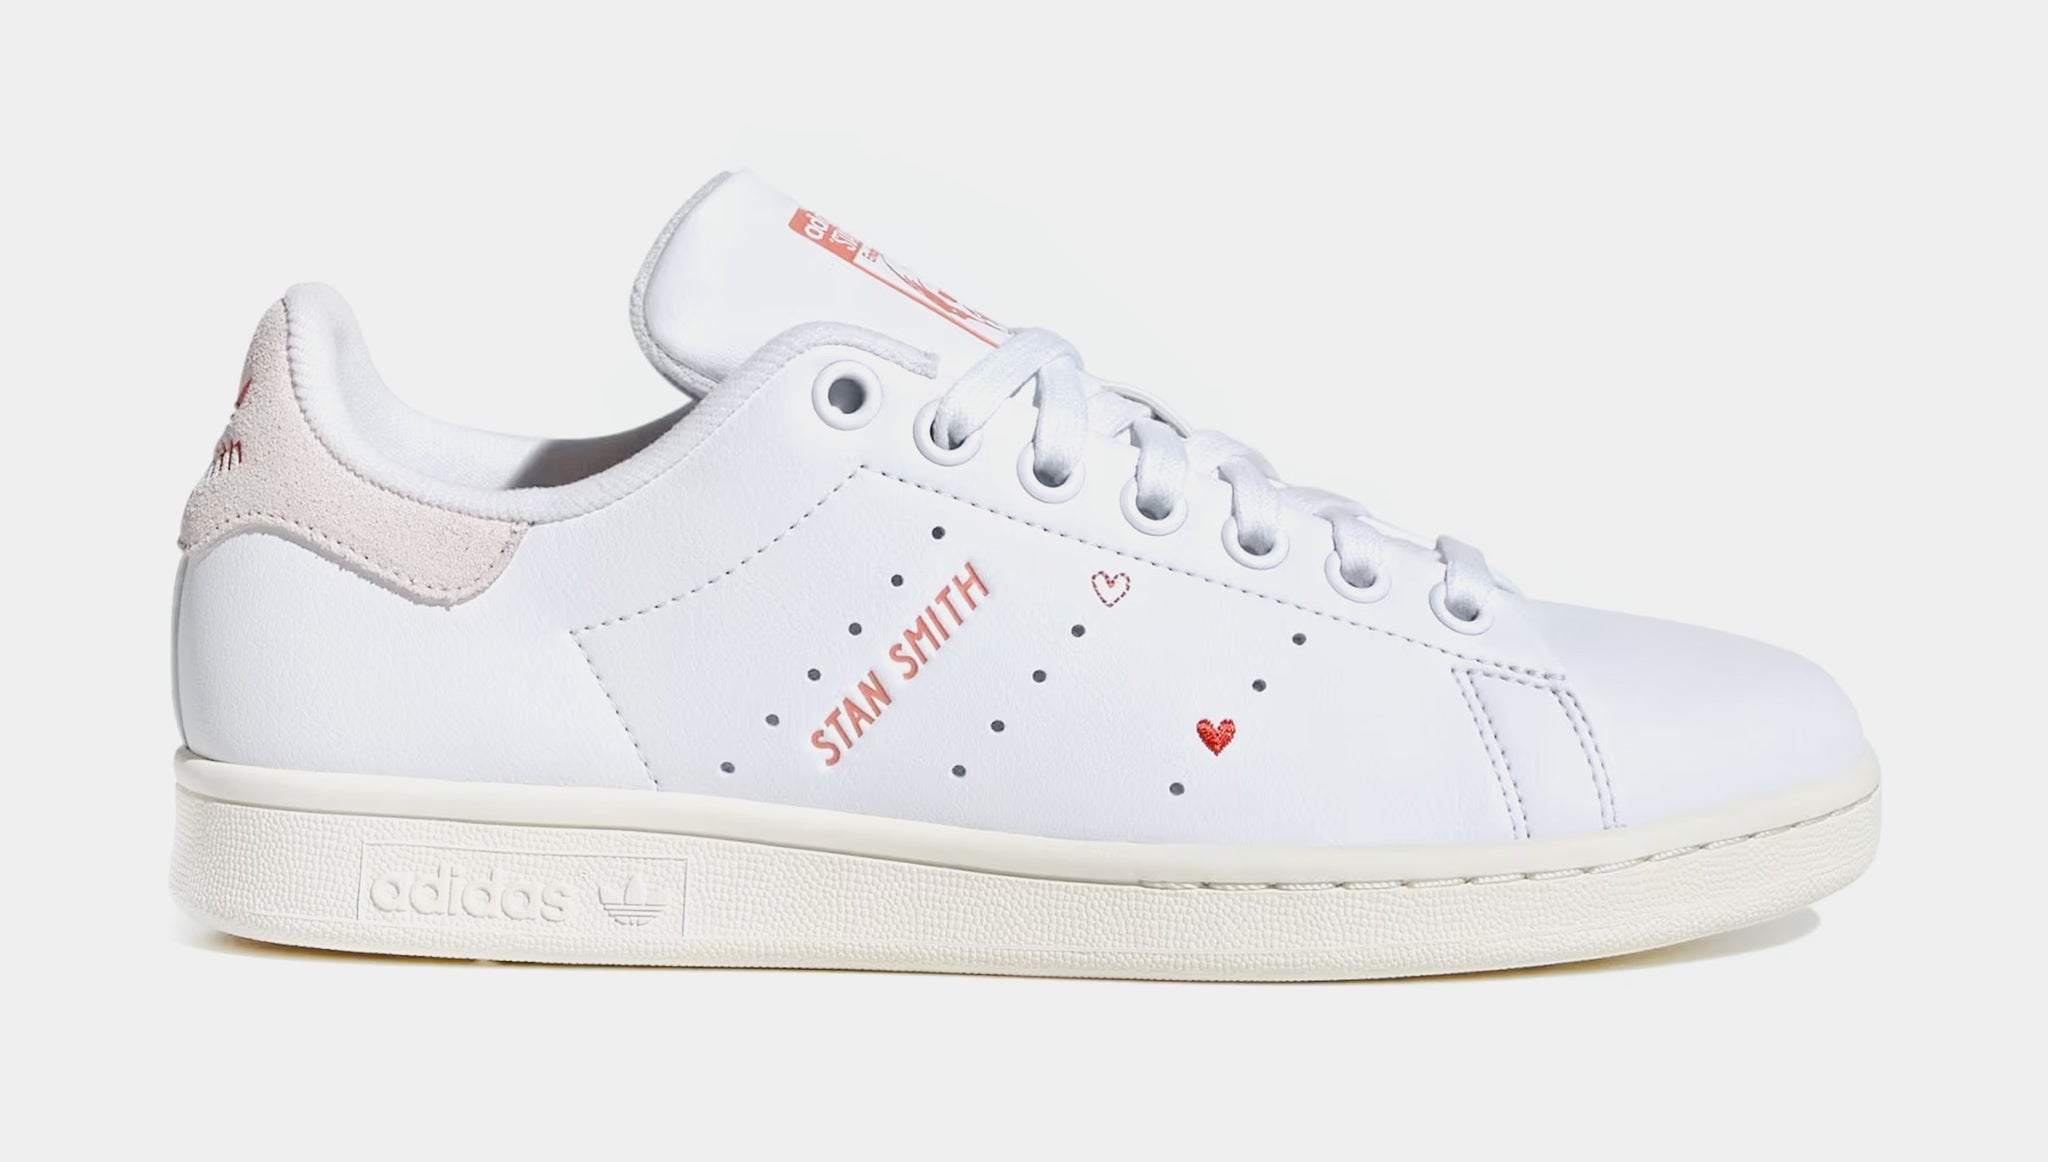 Stan Smith Womens Lifestyle Shoes (White/Red)